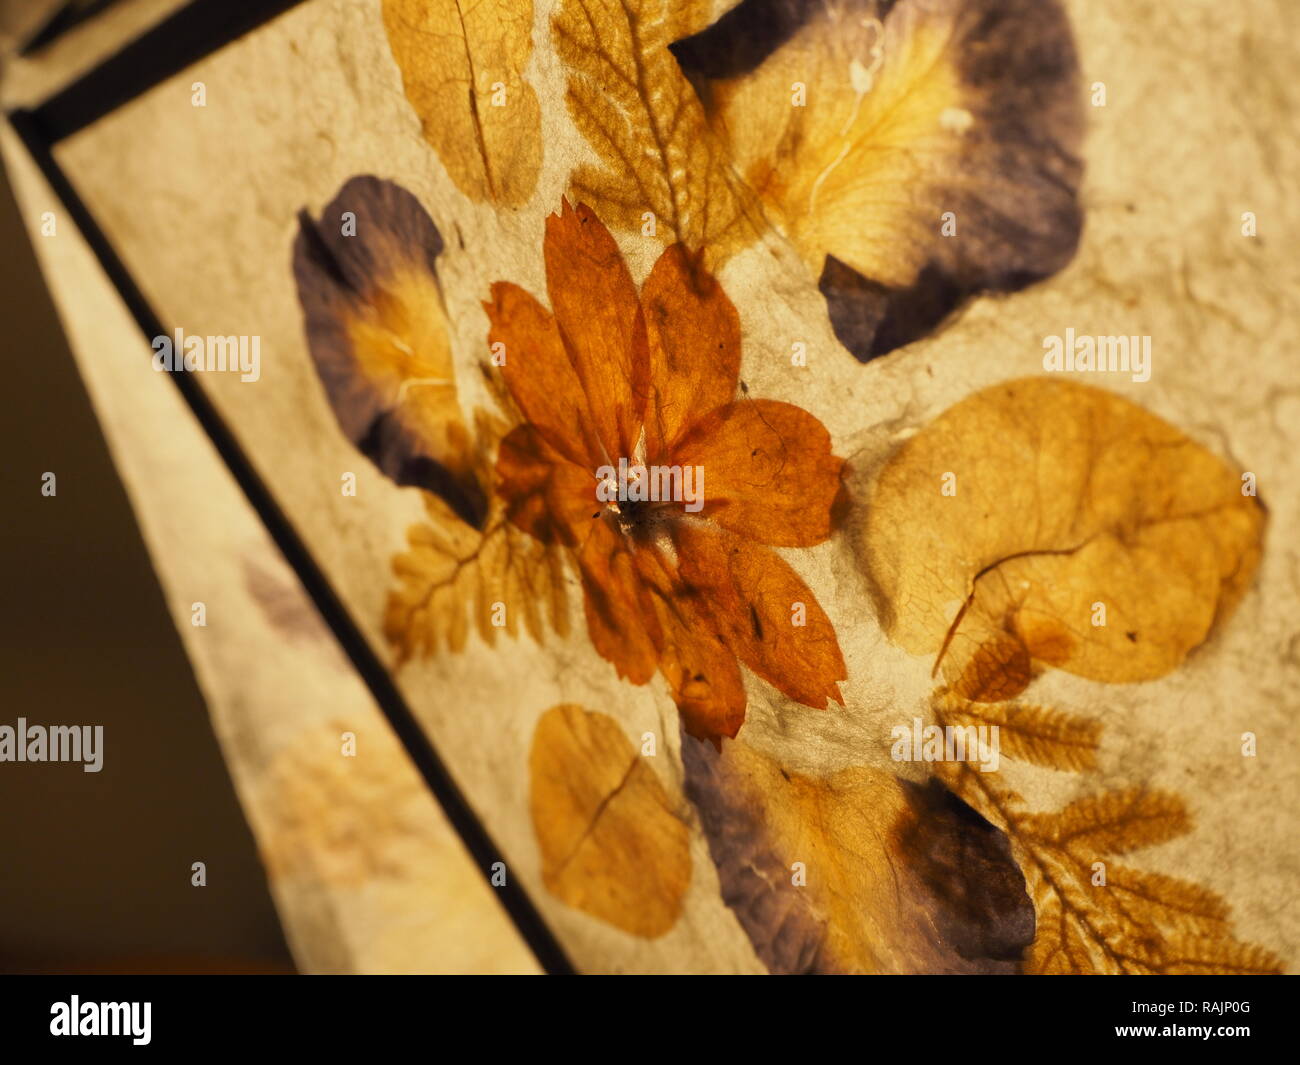 A Close Up of a Flower and Leaf Pressed Lamp Shade Stock Photo